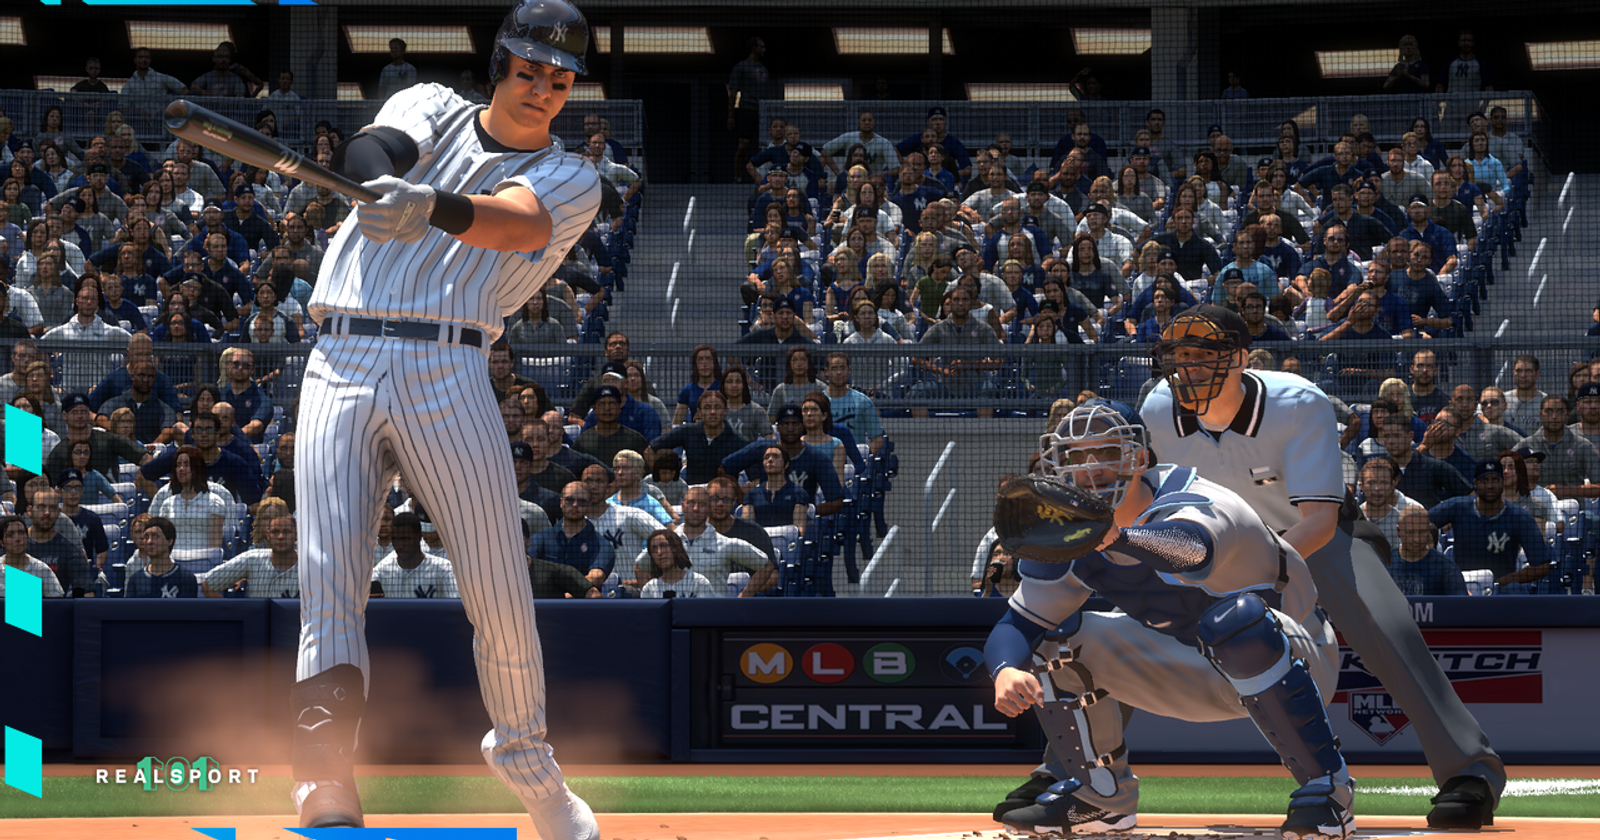 Derek Jeter will be on the cover of MLB The Show 22 (Deluxe